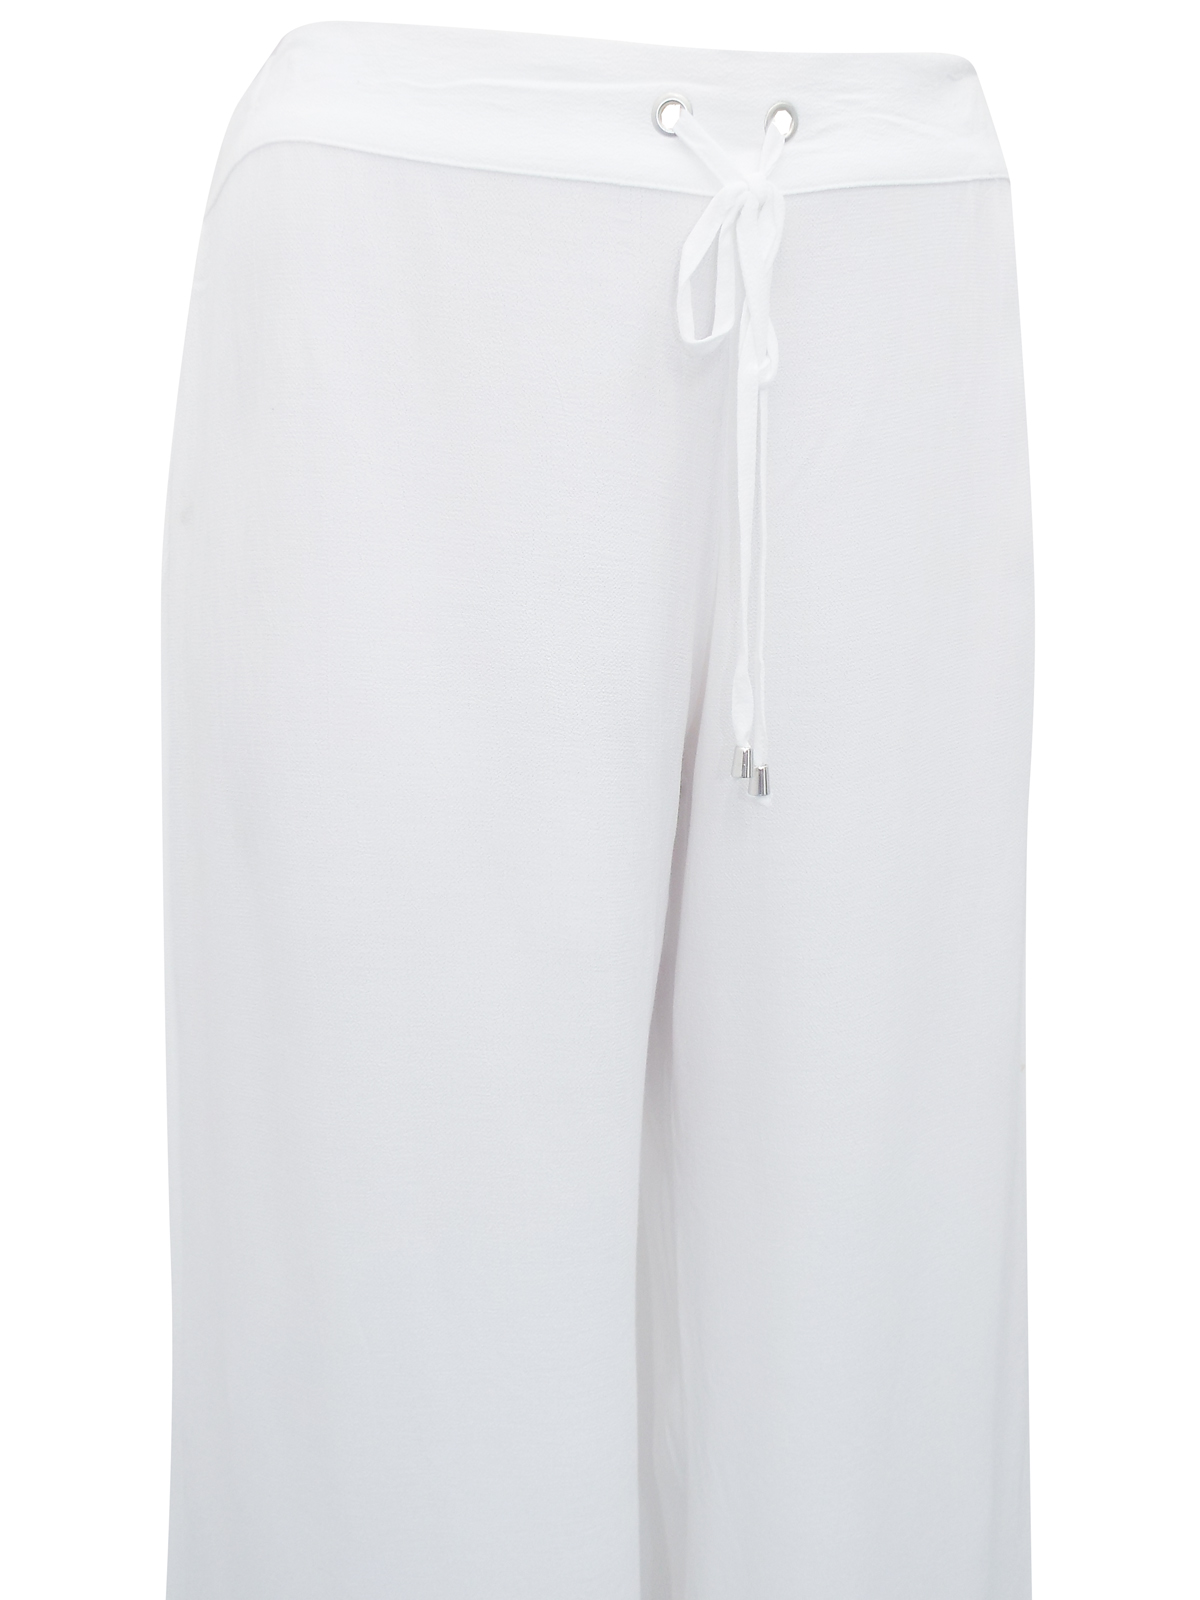 Marks and Spencer - - M&5 WHITE Plait Waist Wide Leg Beach Trousers ...